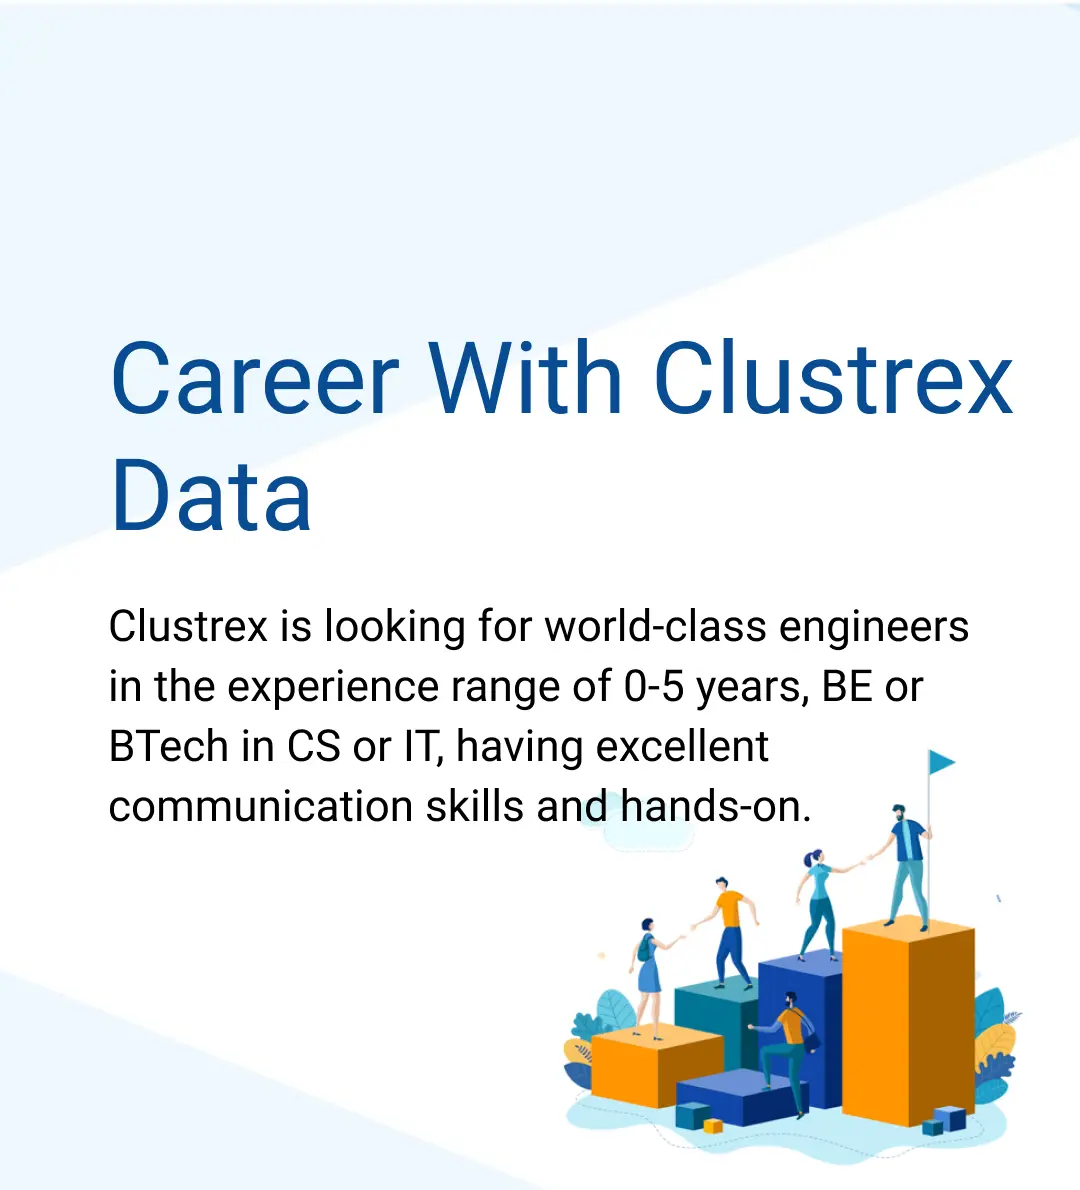 Career With Clustrex Data - Clustrex is looking for world-class engineers in the experience range of 0-5 years, BE or BTech in CS or IT, having excellent communication skills and hands-on.